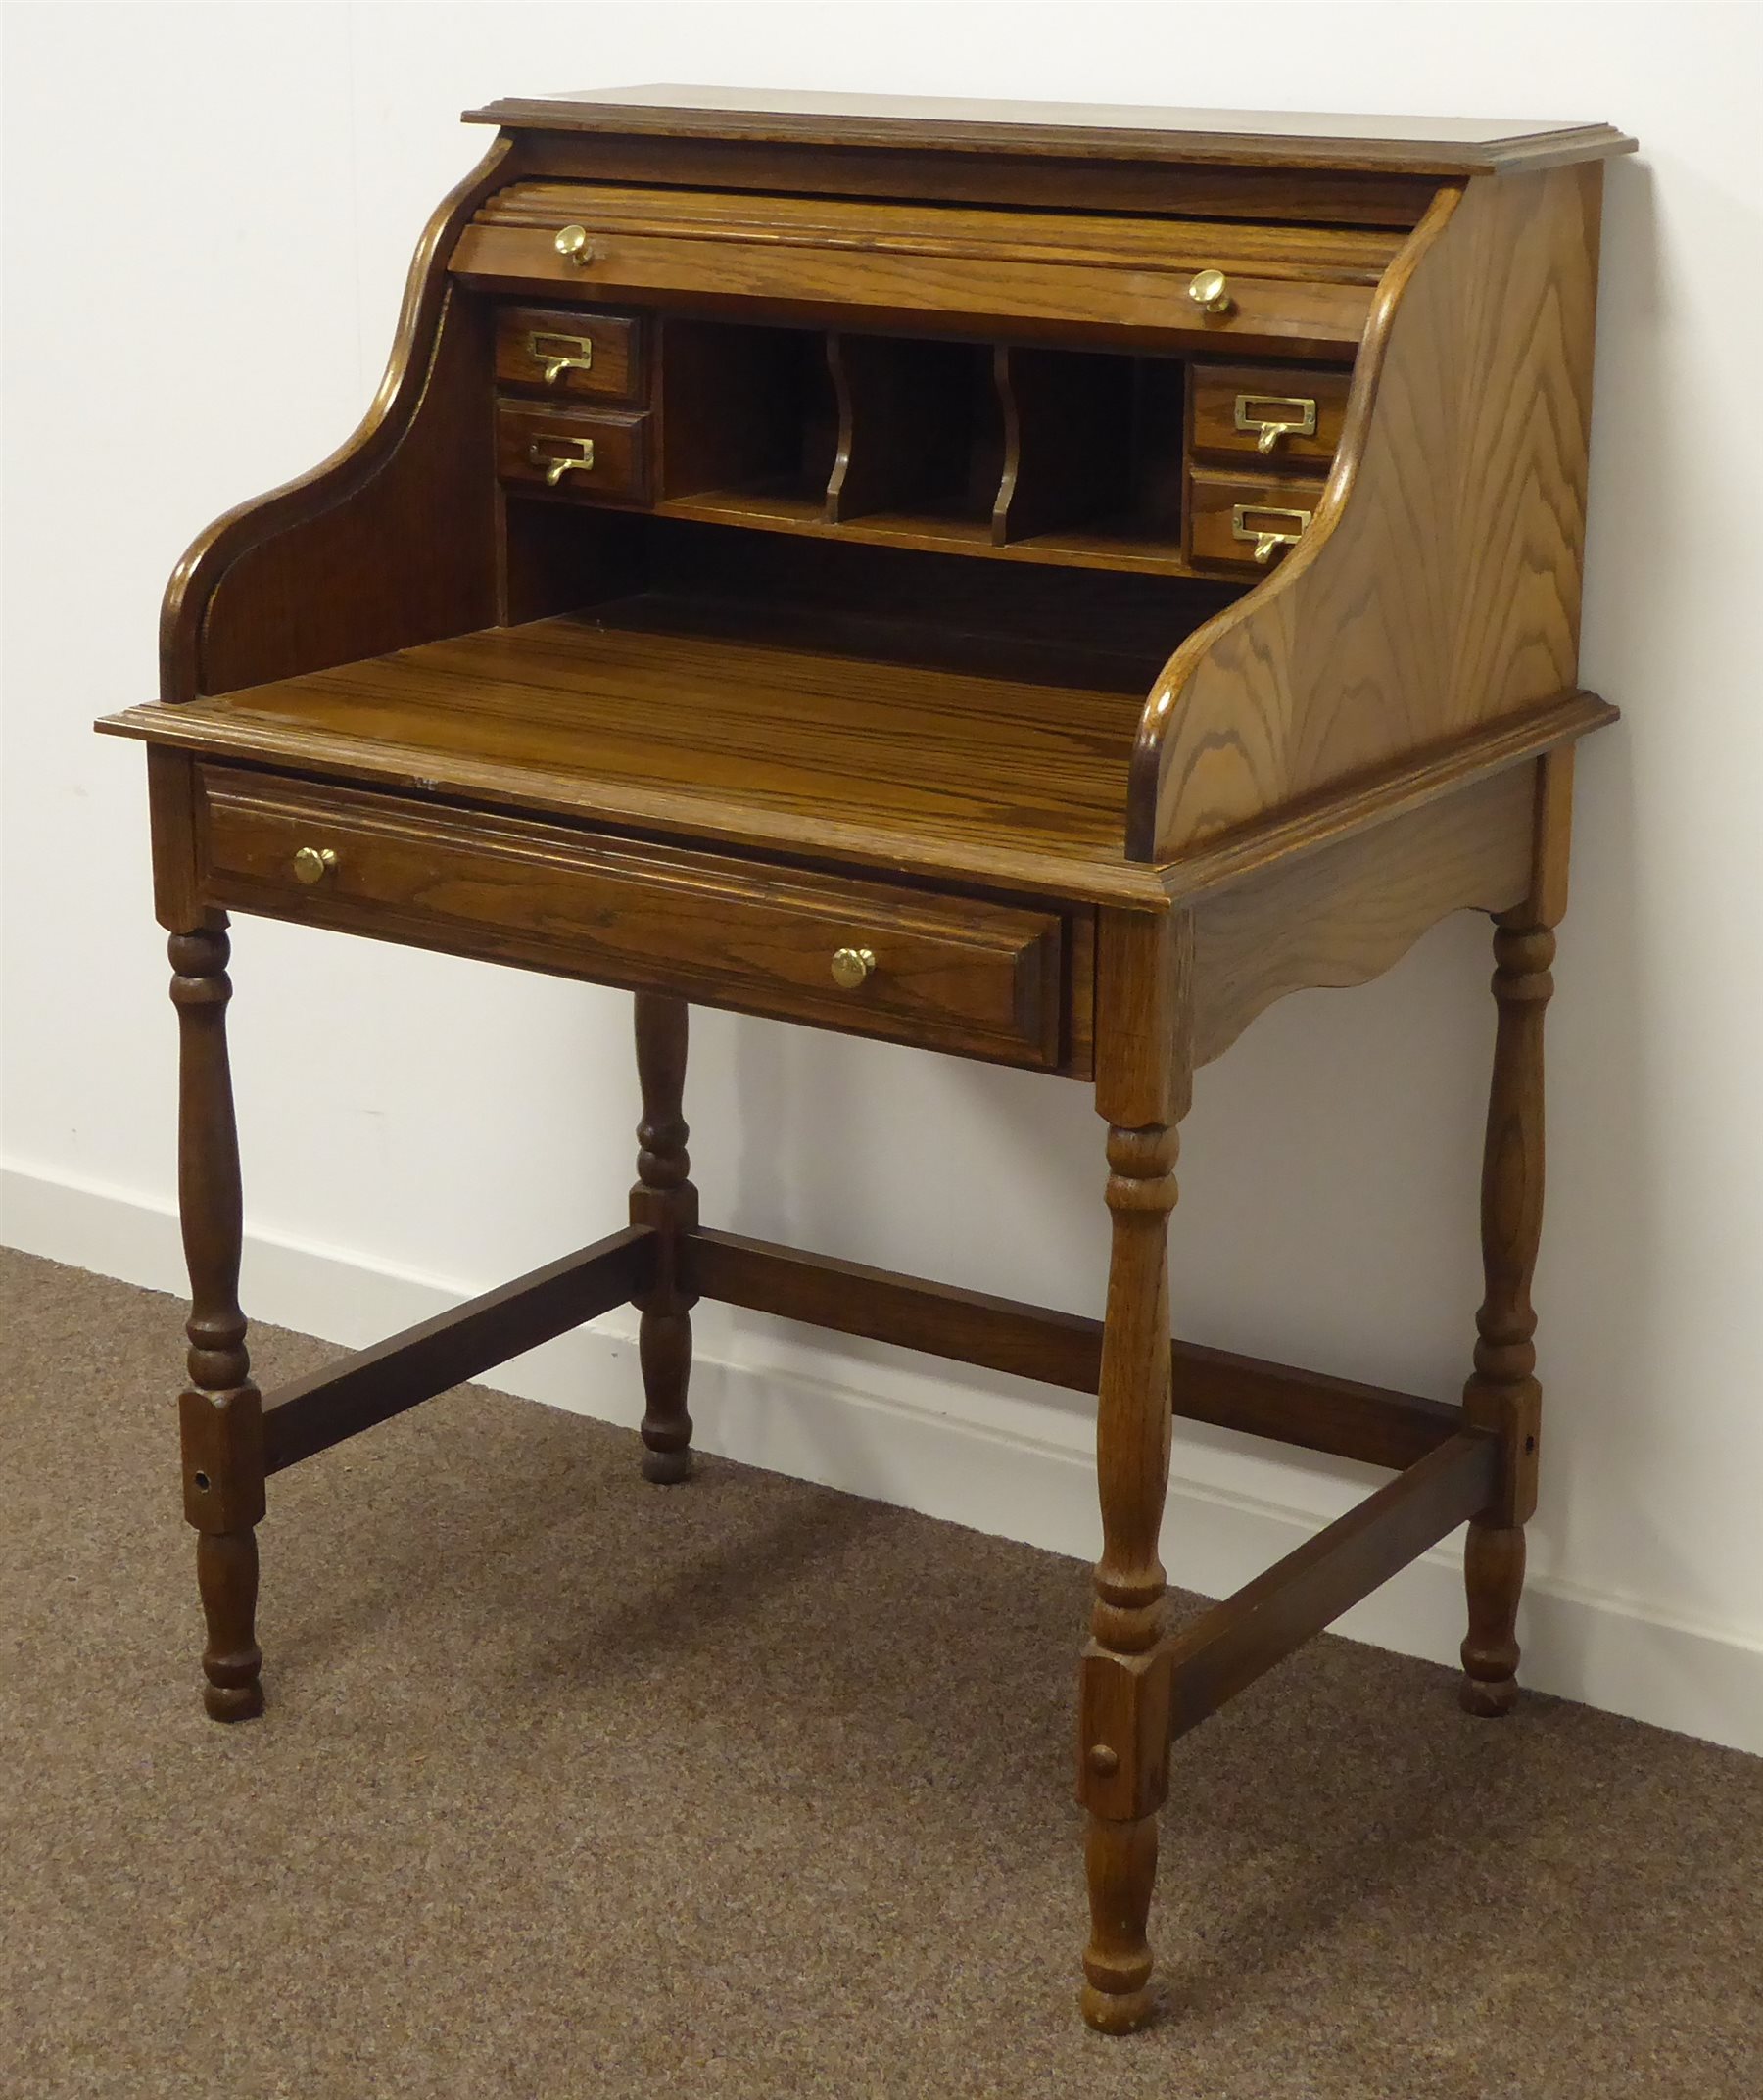 20th Century Oak Tambour Roll Top Desk Interior Fitted With Small